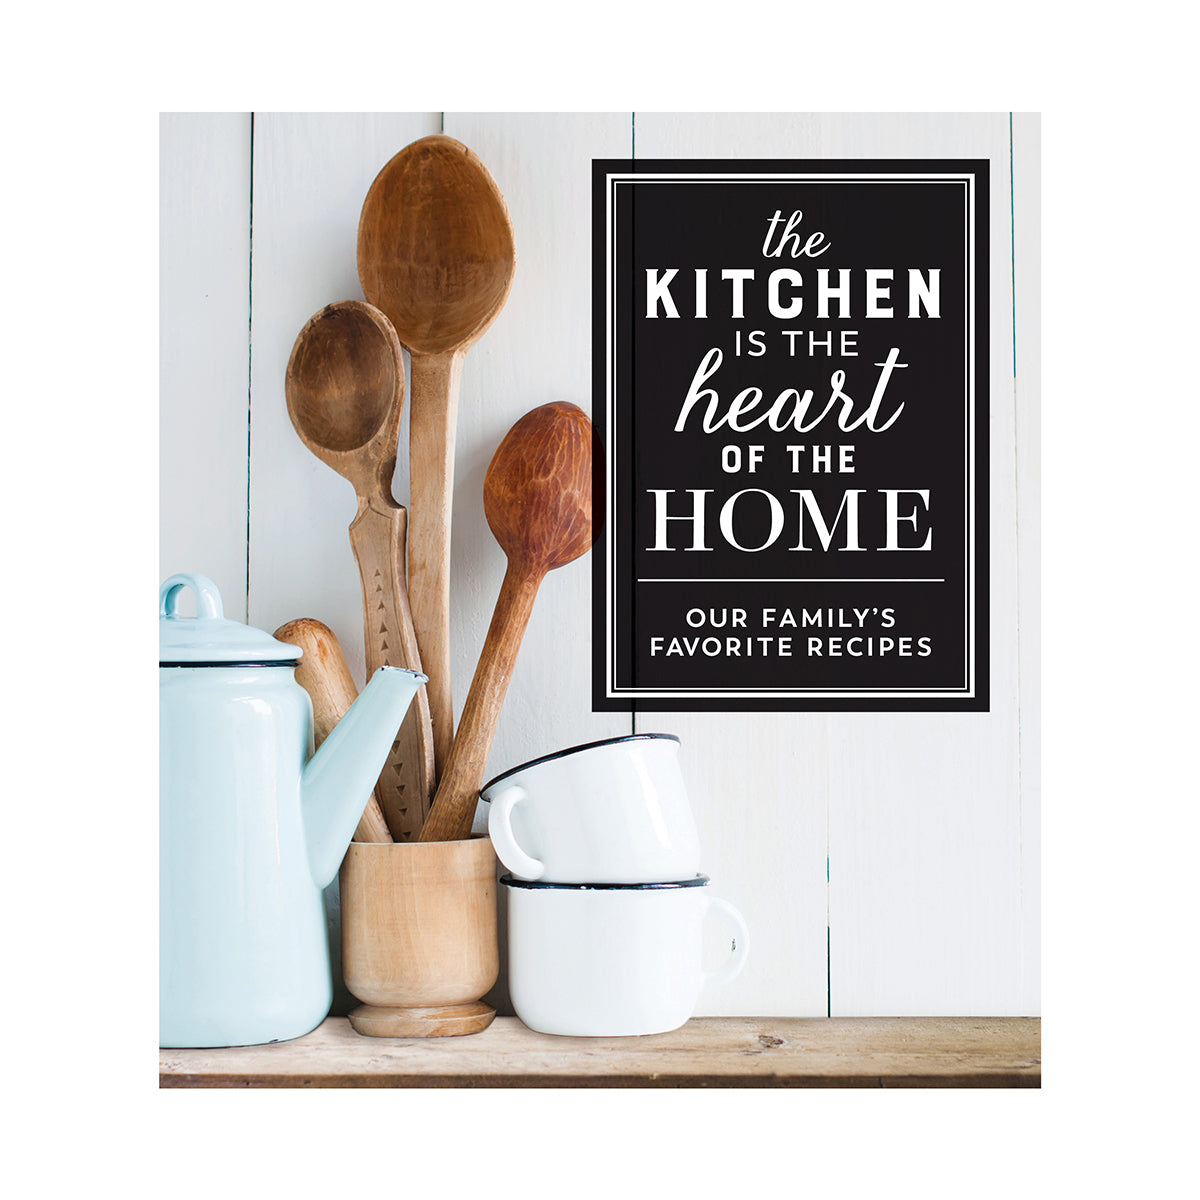 Deluxe Recipe Binder  The Kitchen Is the Heart of the Home Our Family's Favorite Recipes